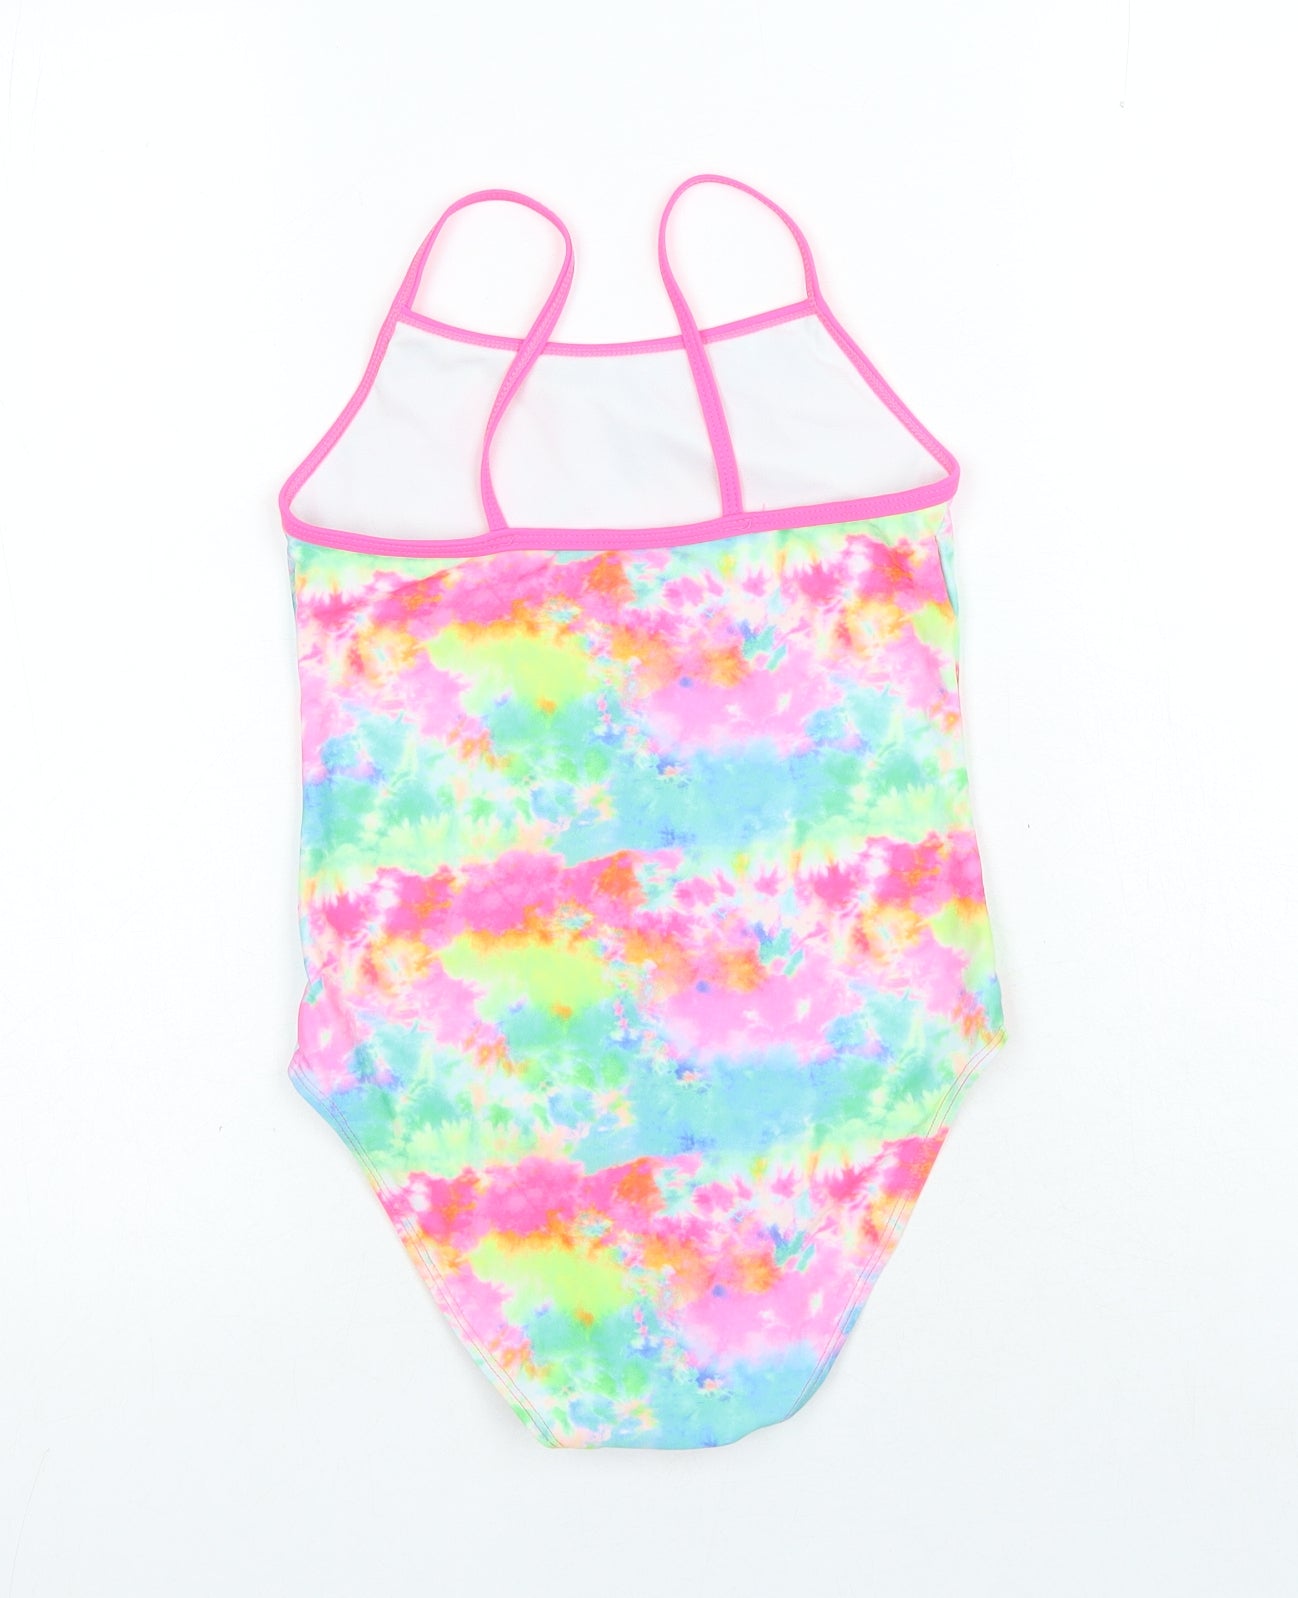 Dunnes Stores Girls Multicoloured Tie Dye Polyester Playsuit One-Piece Size 10-11 Years - Swimwear